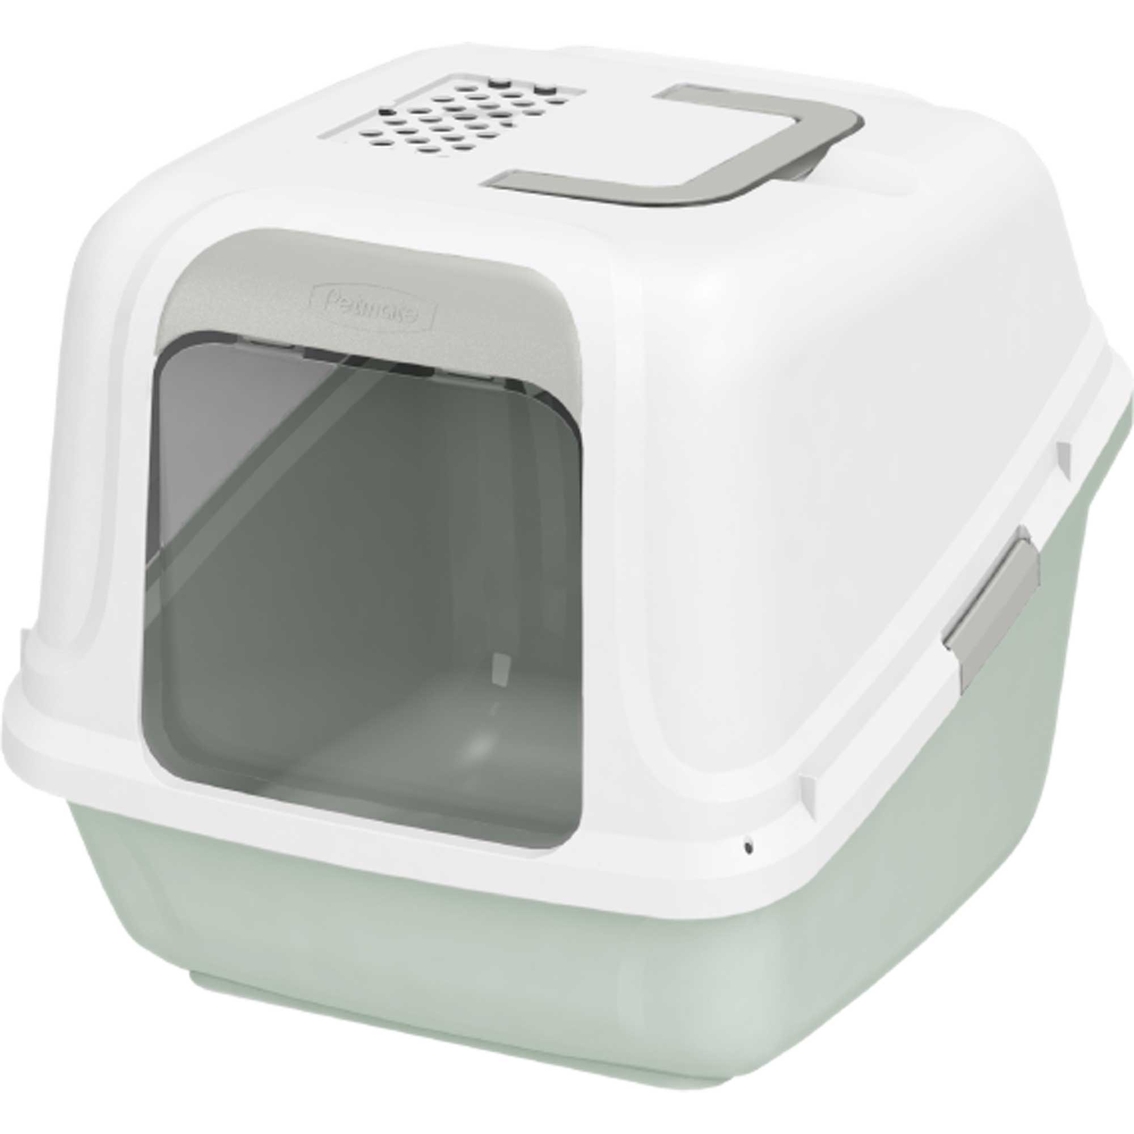 Petmate Premium Hooded Litter Box with Door, Large - Image 3 of 4